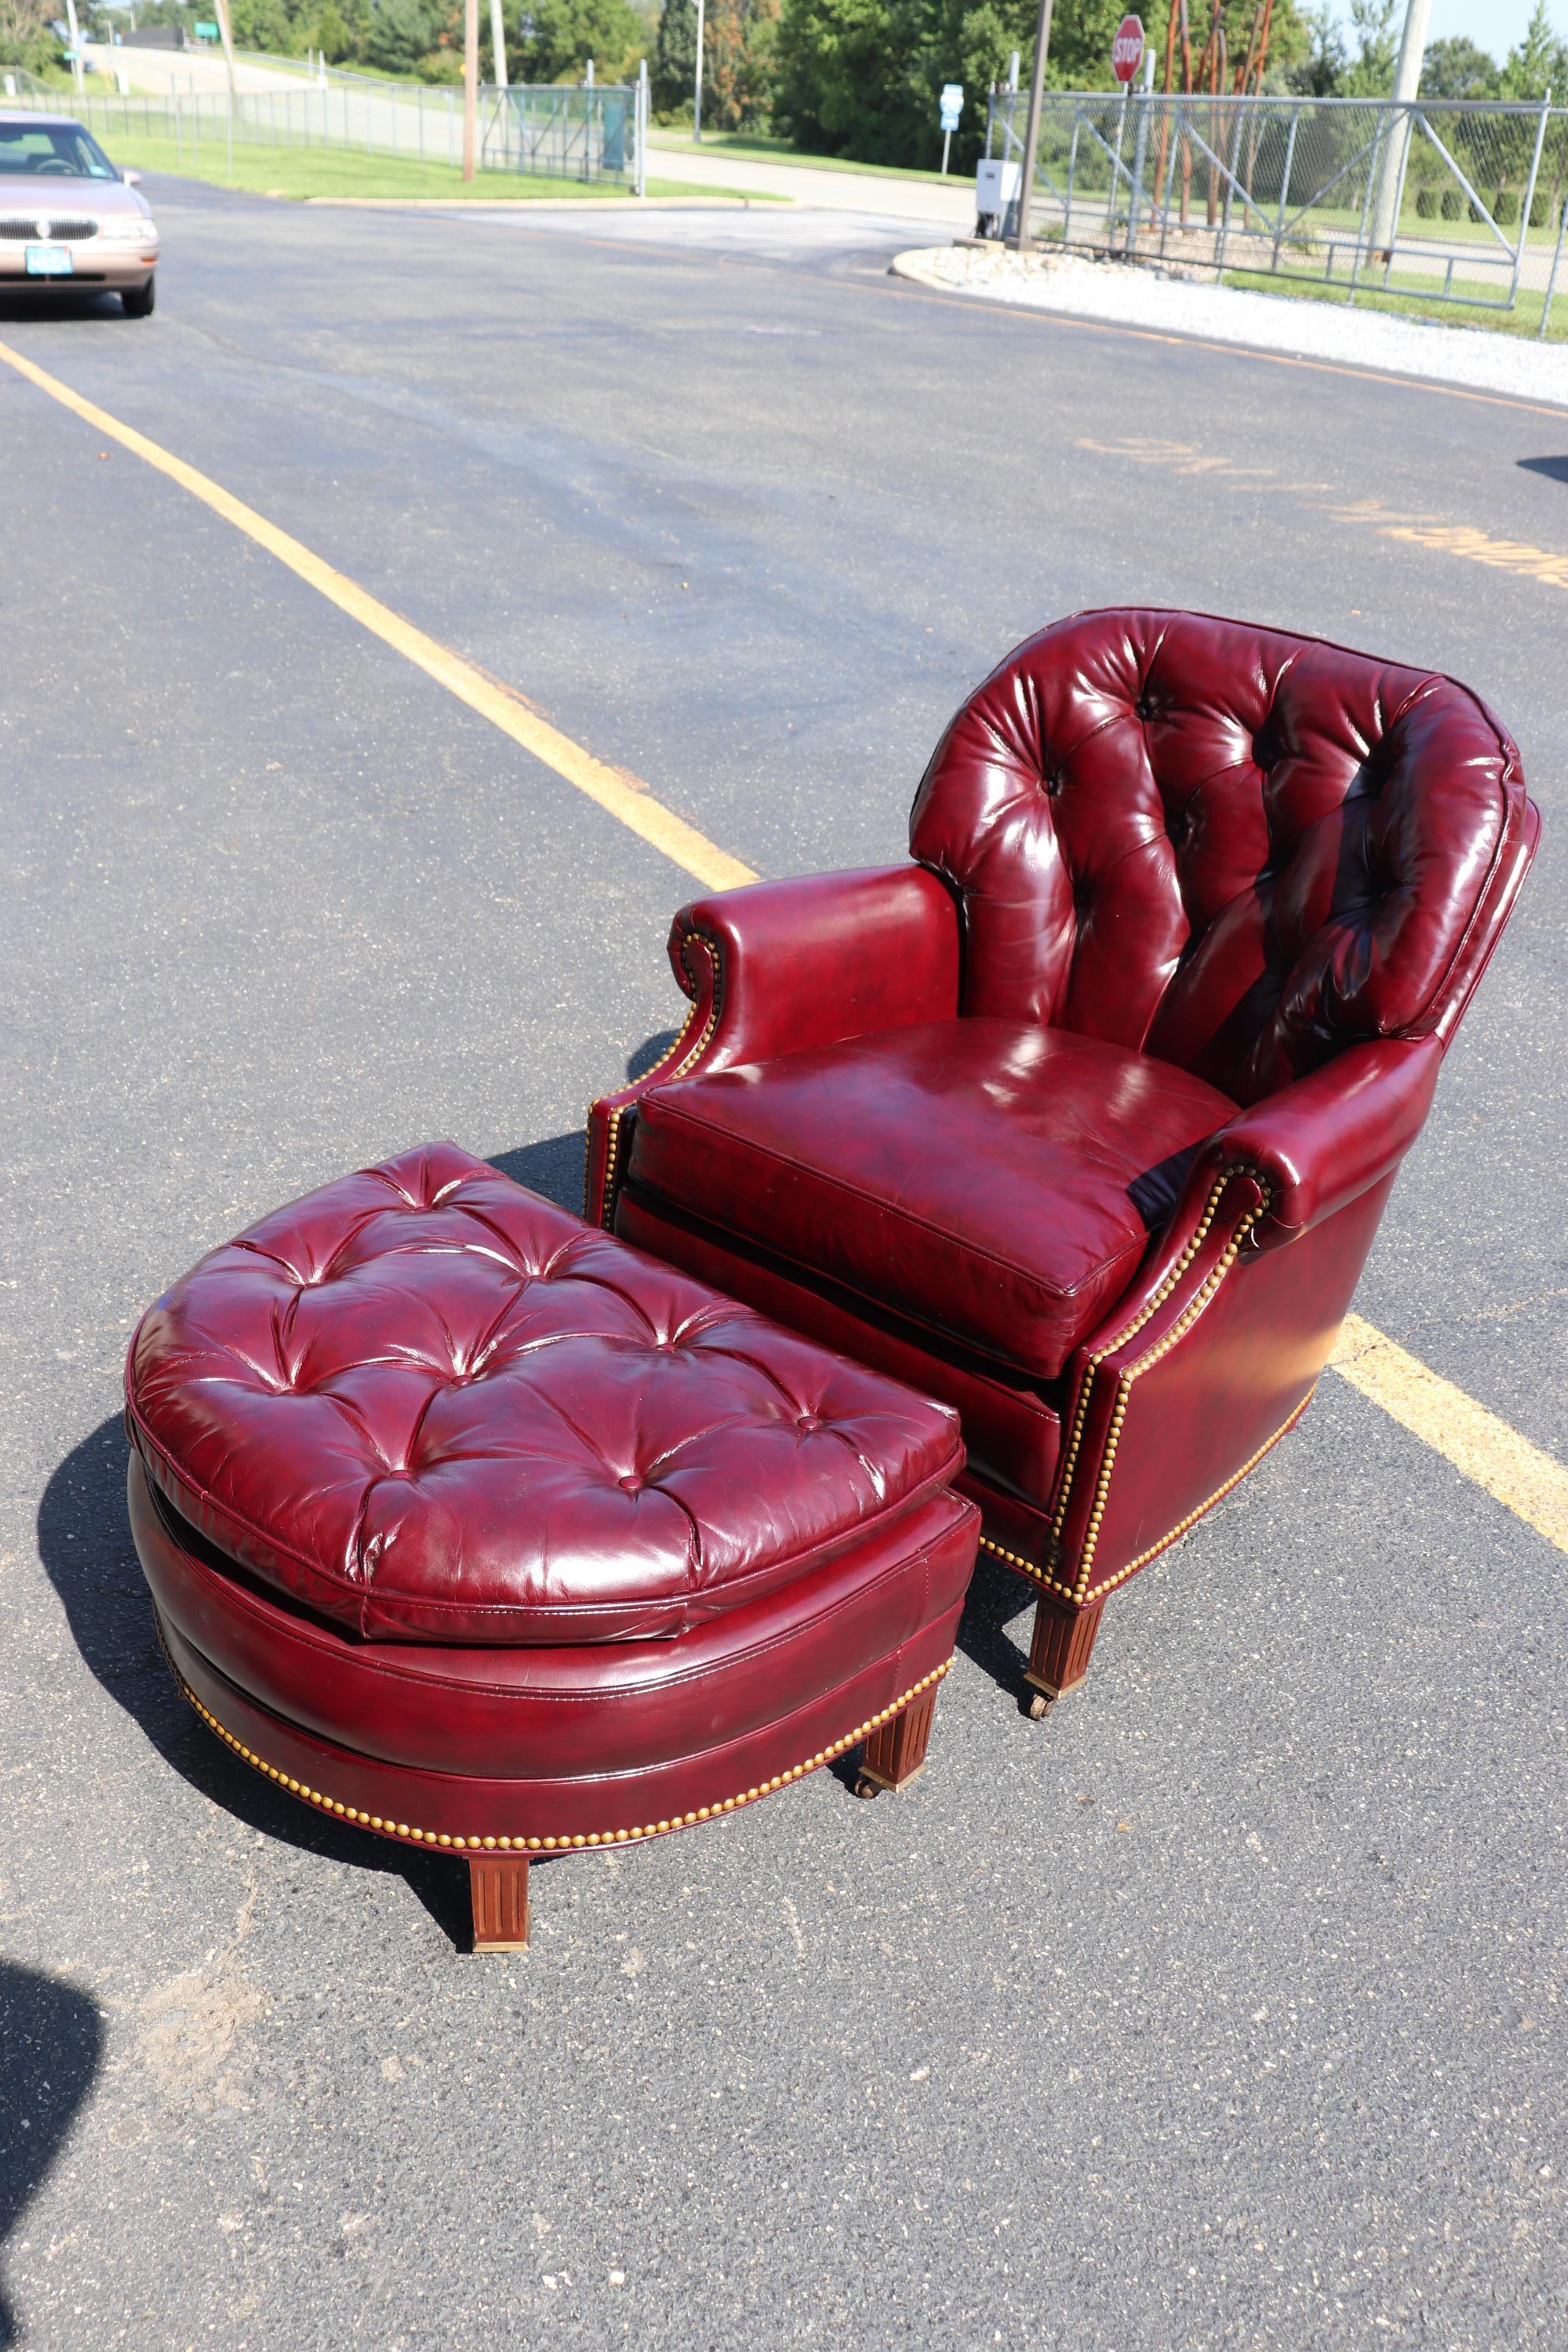 This is a stunning and absolutely superb quality leather and ottoman set by Hancock and Moore. The condition of the rich burgundy leather is outstanding and there are few defects other than normal wear from use that are shown in the photos. No